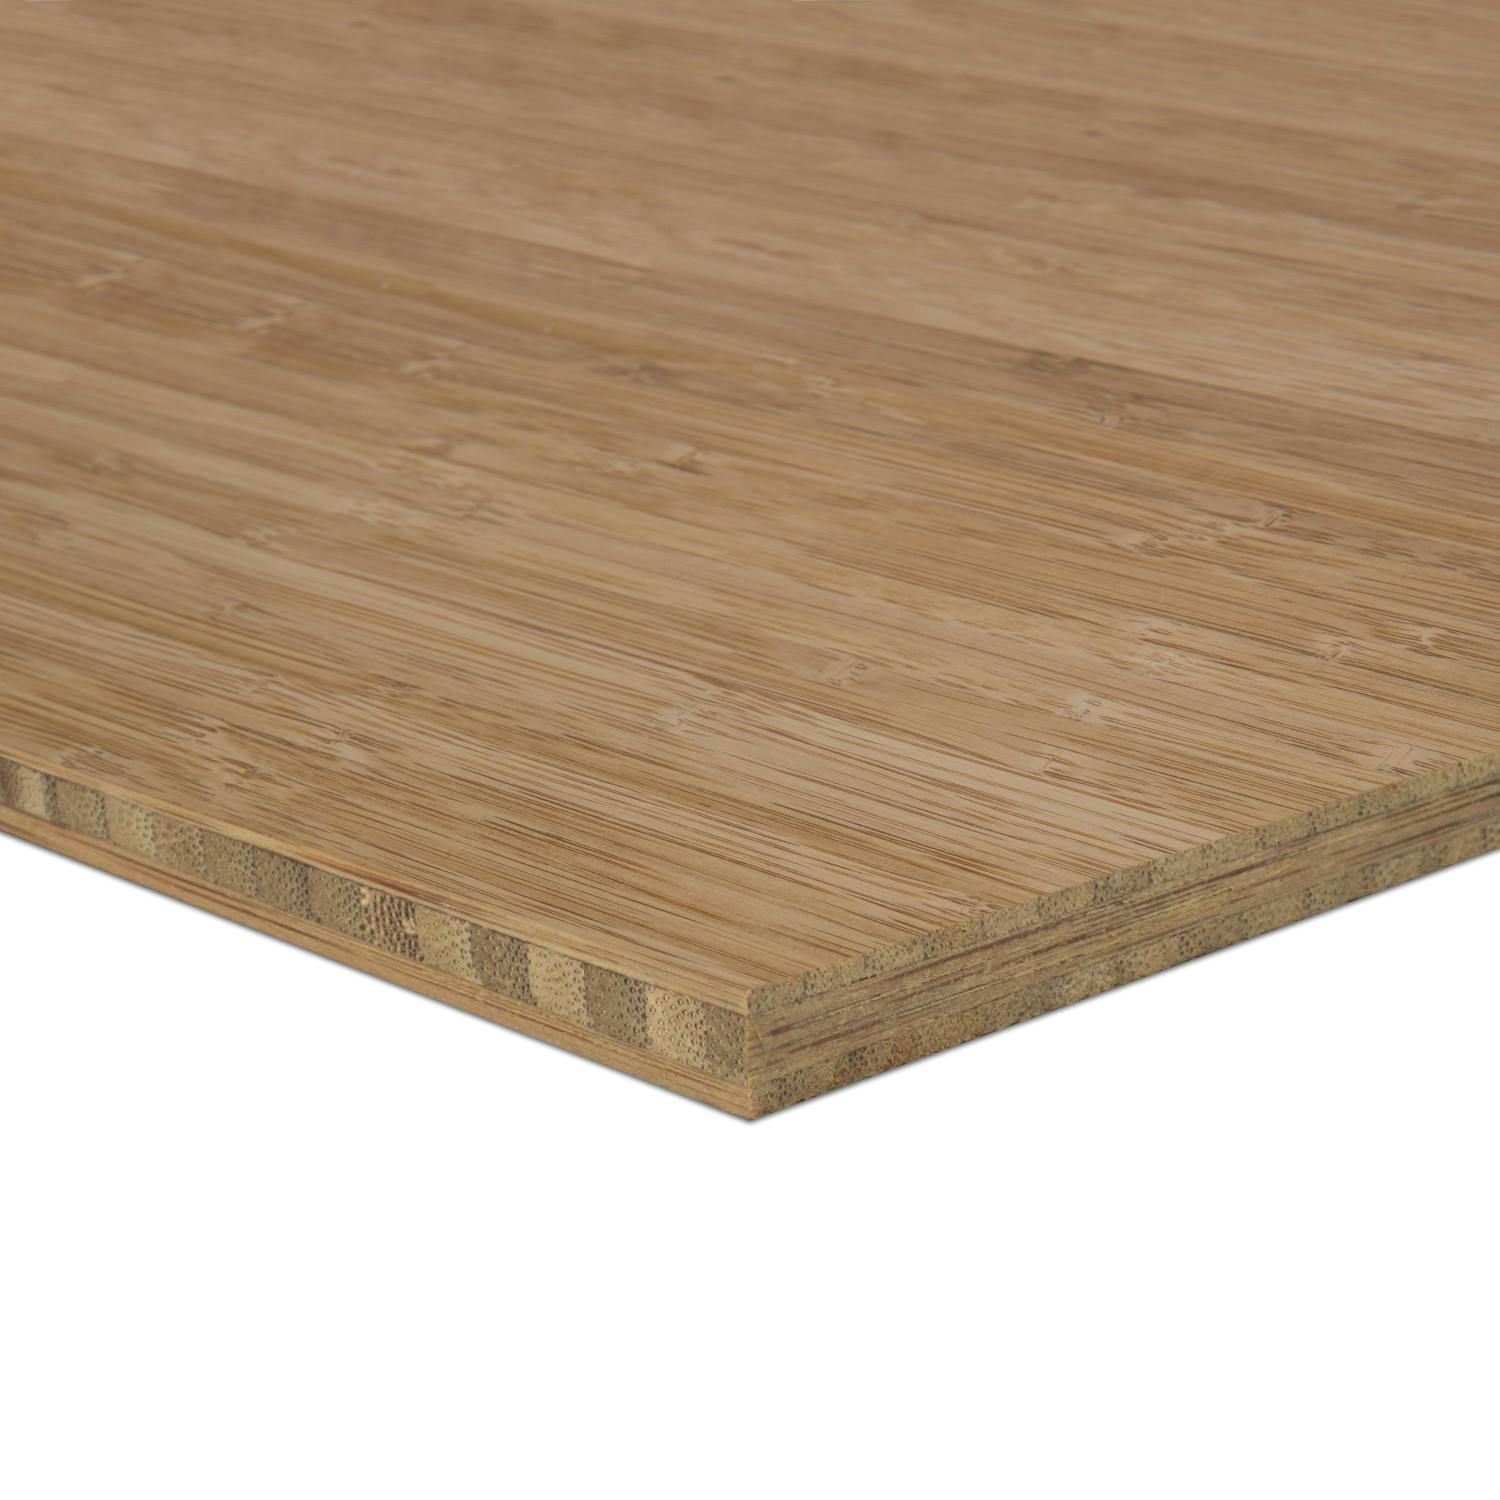 1/4 Inch Carbonized Vertical Bamboo Plywood - 3 PLY